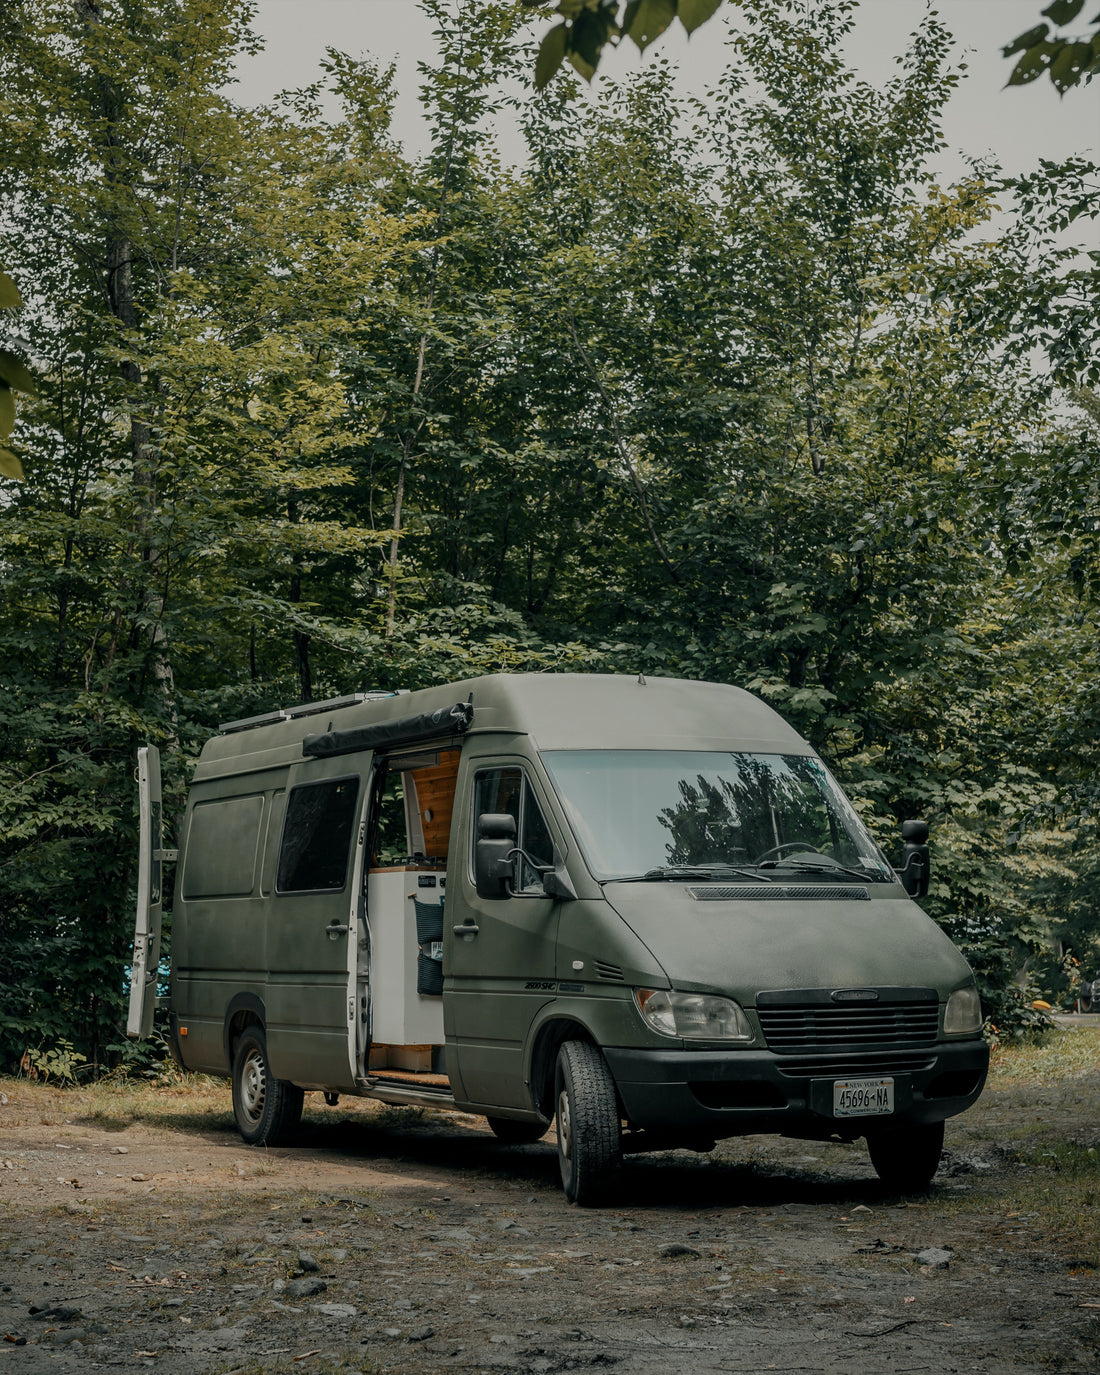 Build Your Own Conversion Van and Live the Adventure